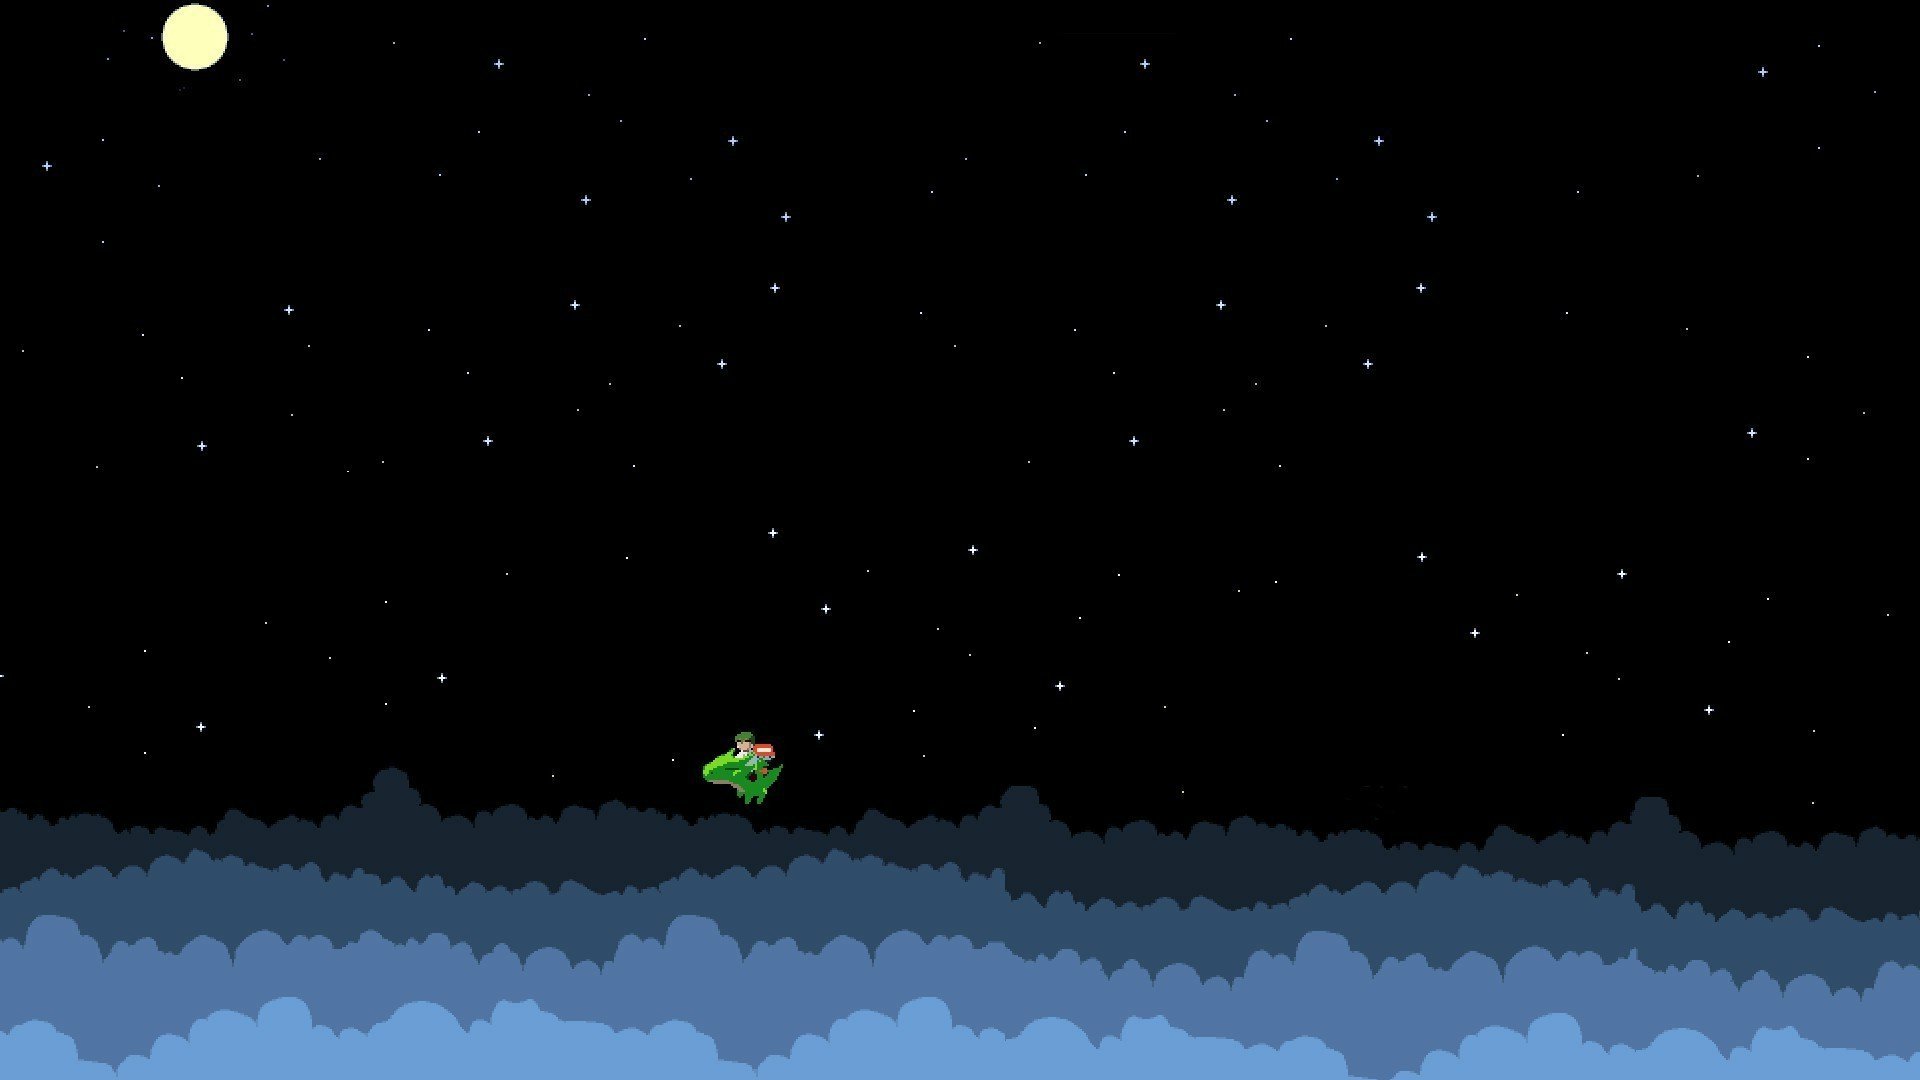 HD desktop wallpaper of a pixel art 8-bit night sky with stars, clouds, and a small green character.